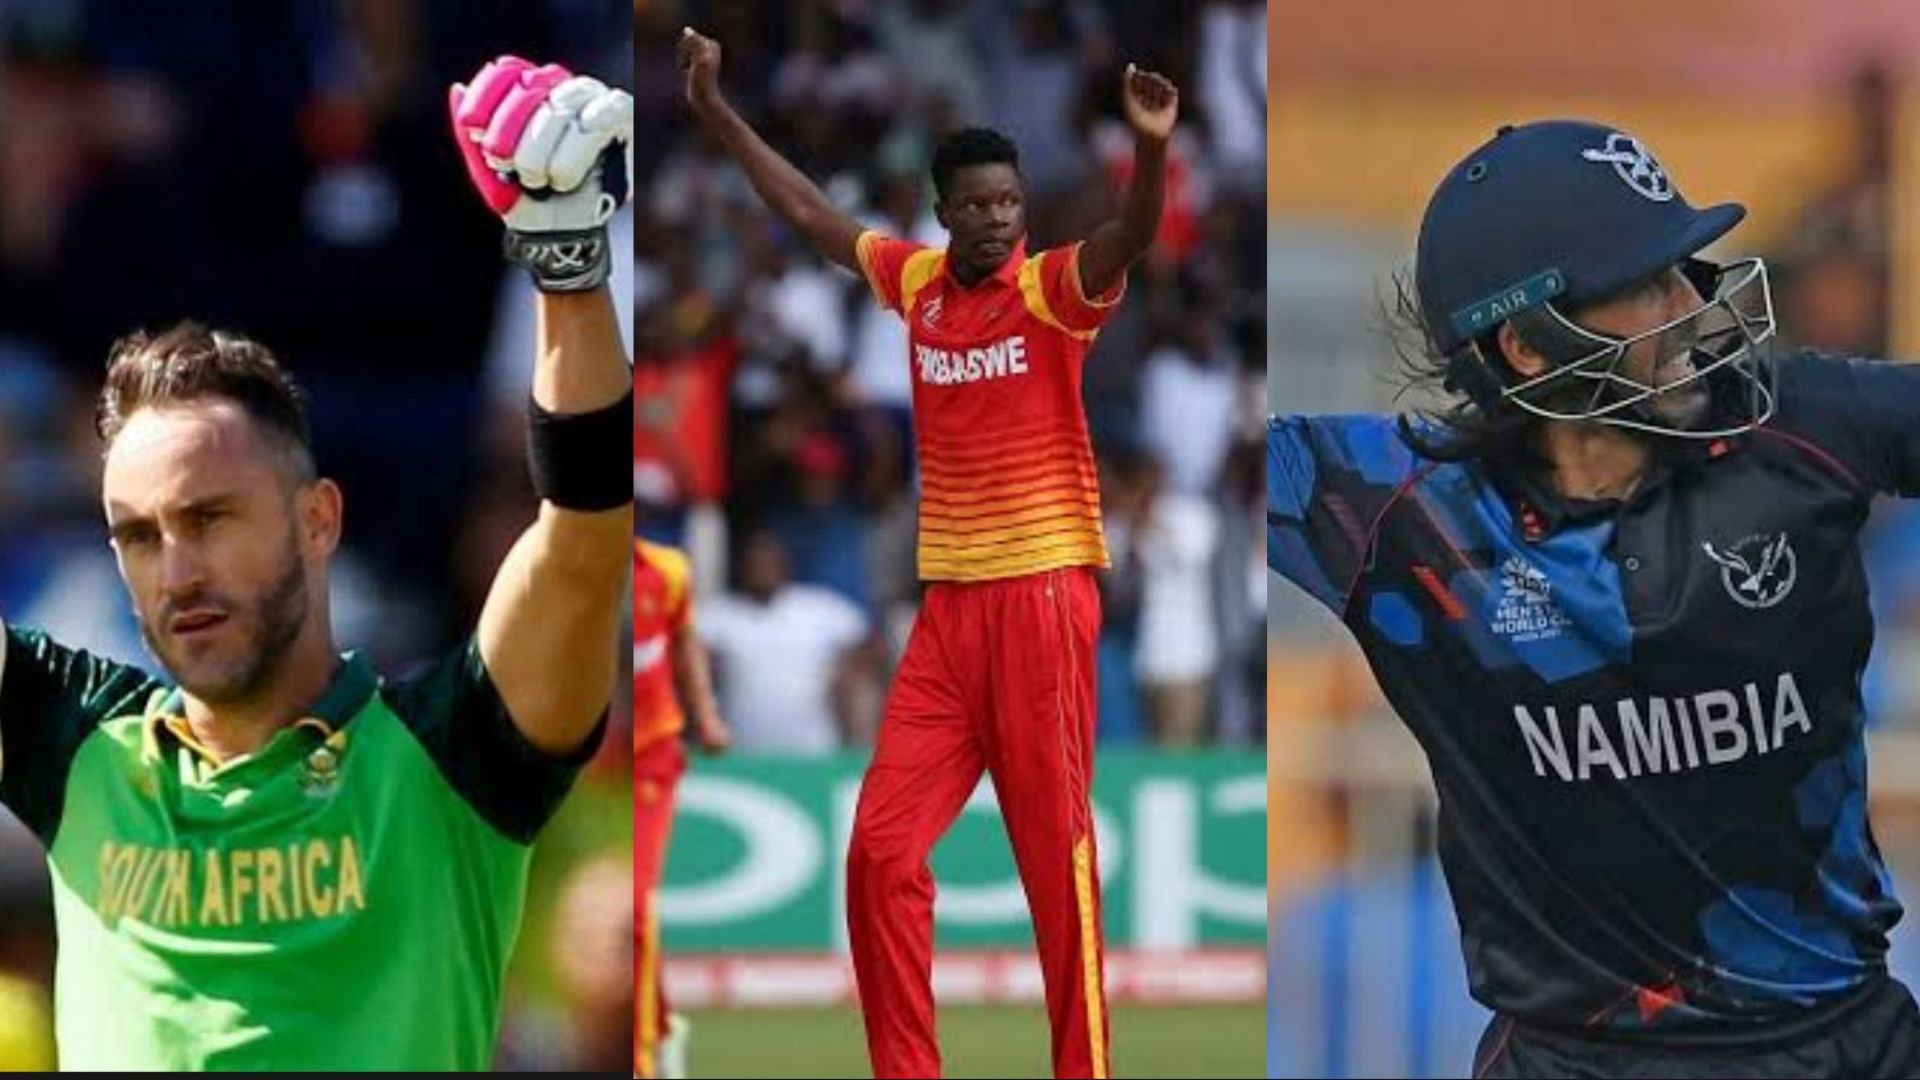 Africa XI will probably feature players from South Africa, Zimbabwe and Namibia